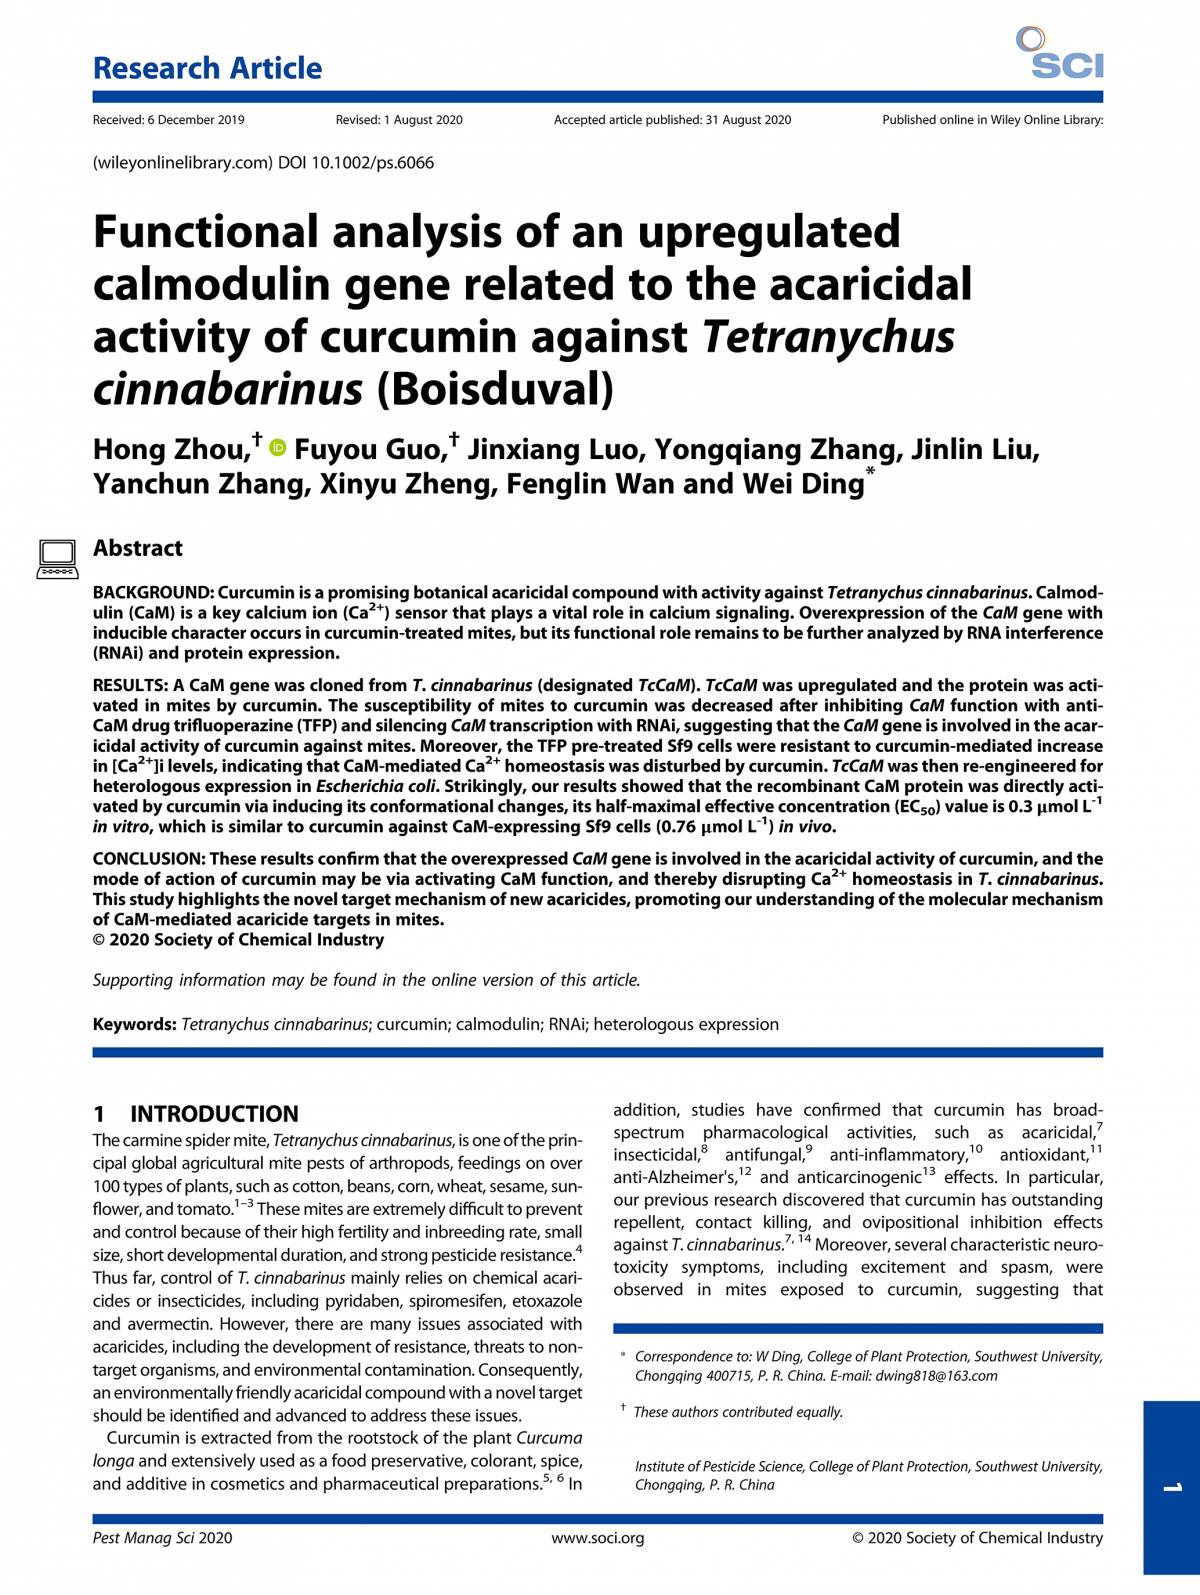 Functional analysis of an upregulated calmodulin gene related to the acaricidal activity of curcumin against Tetranychus cinnabarinus (Boisduval)_页面_01.png